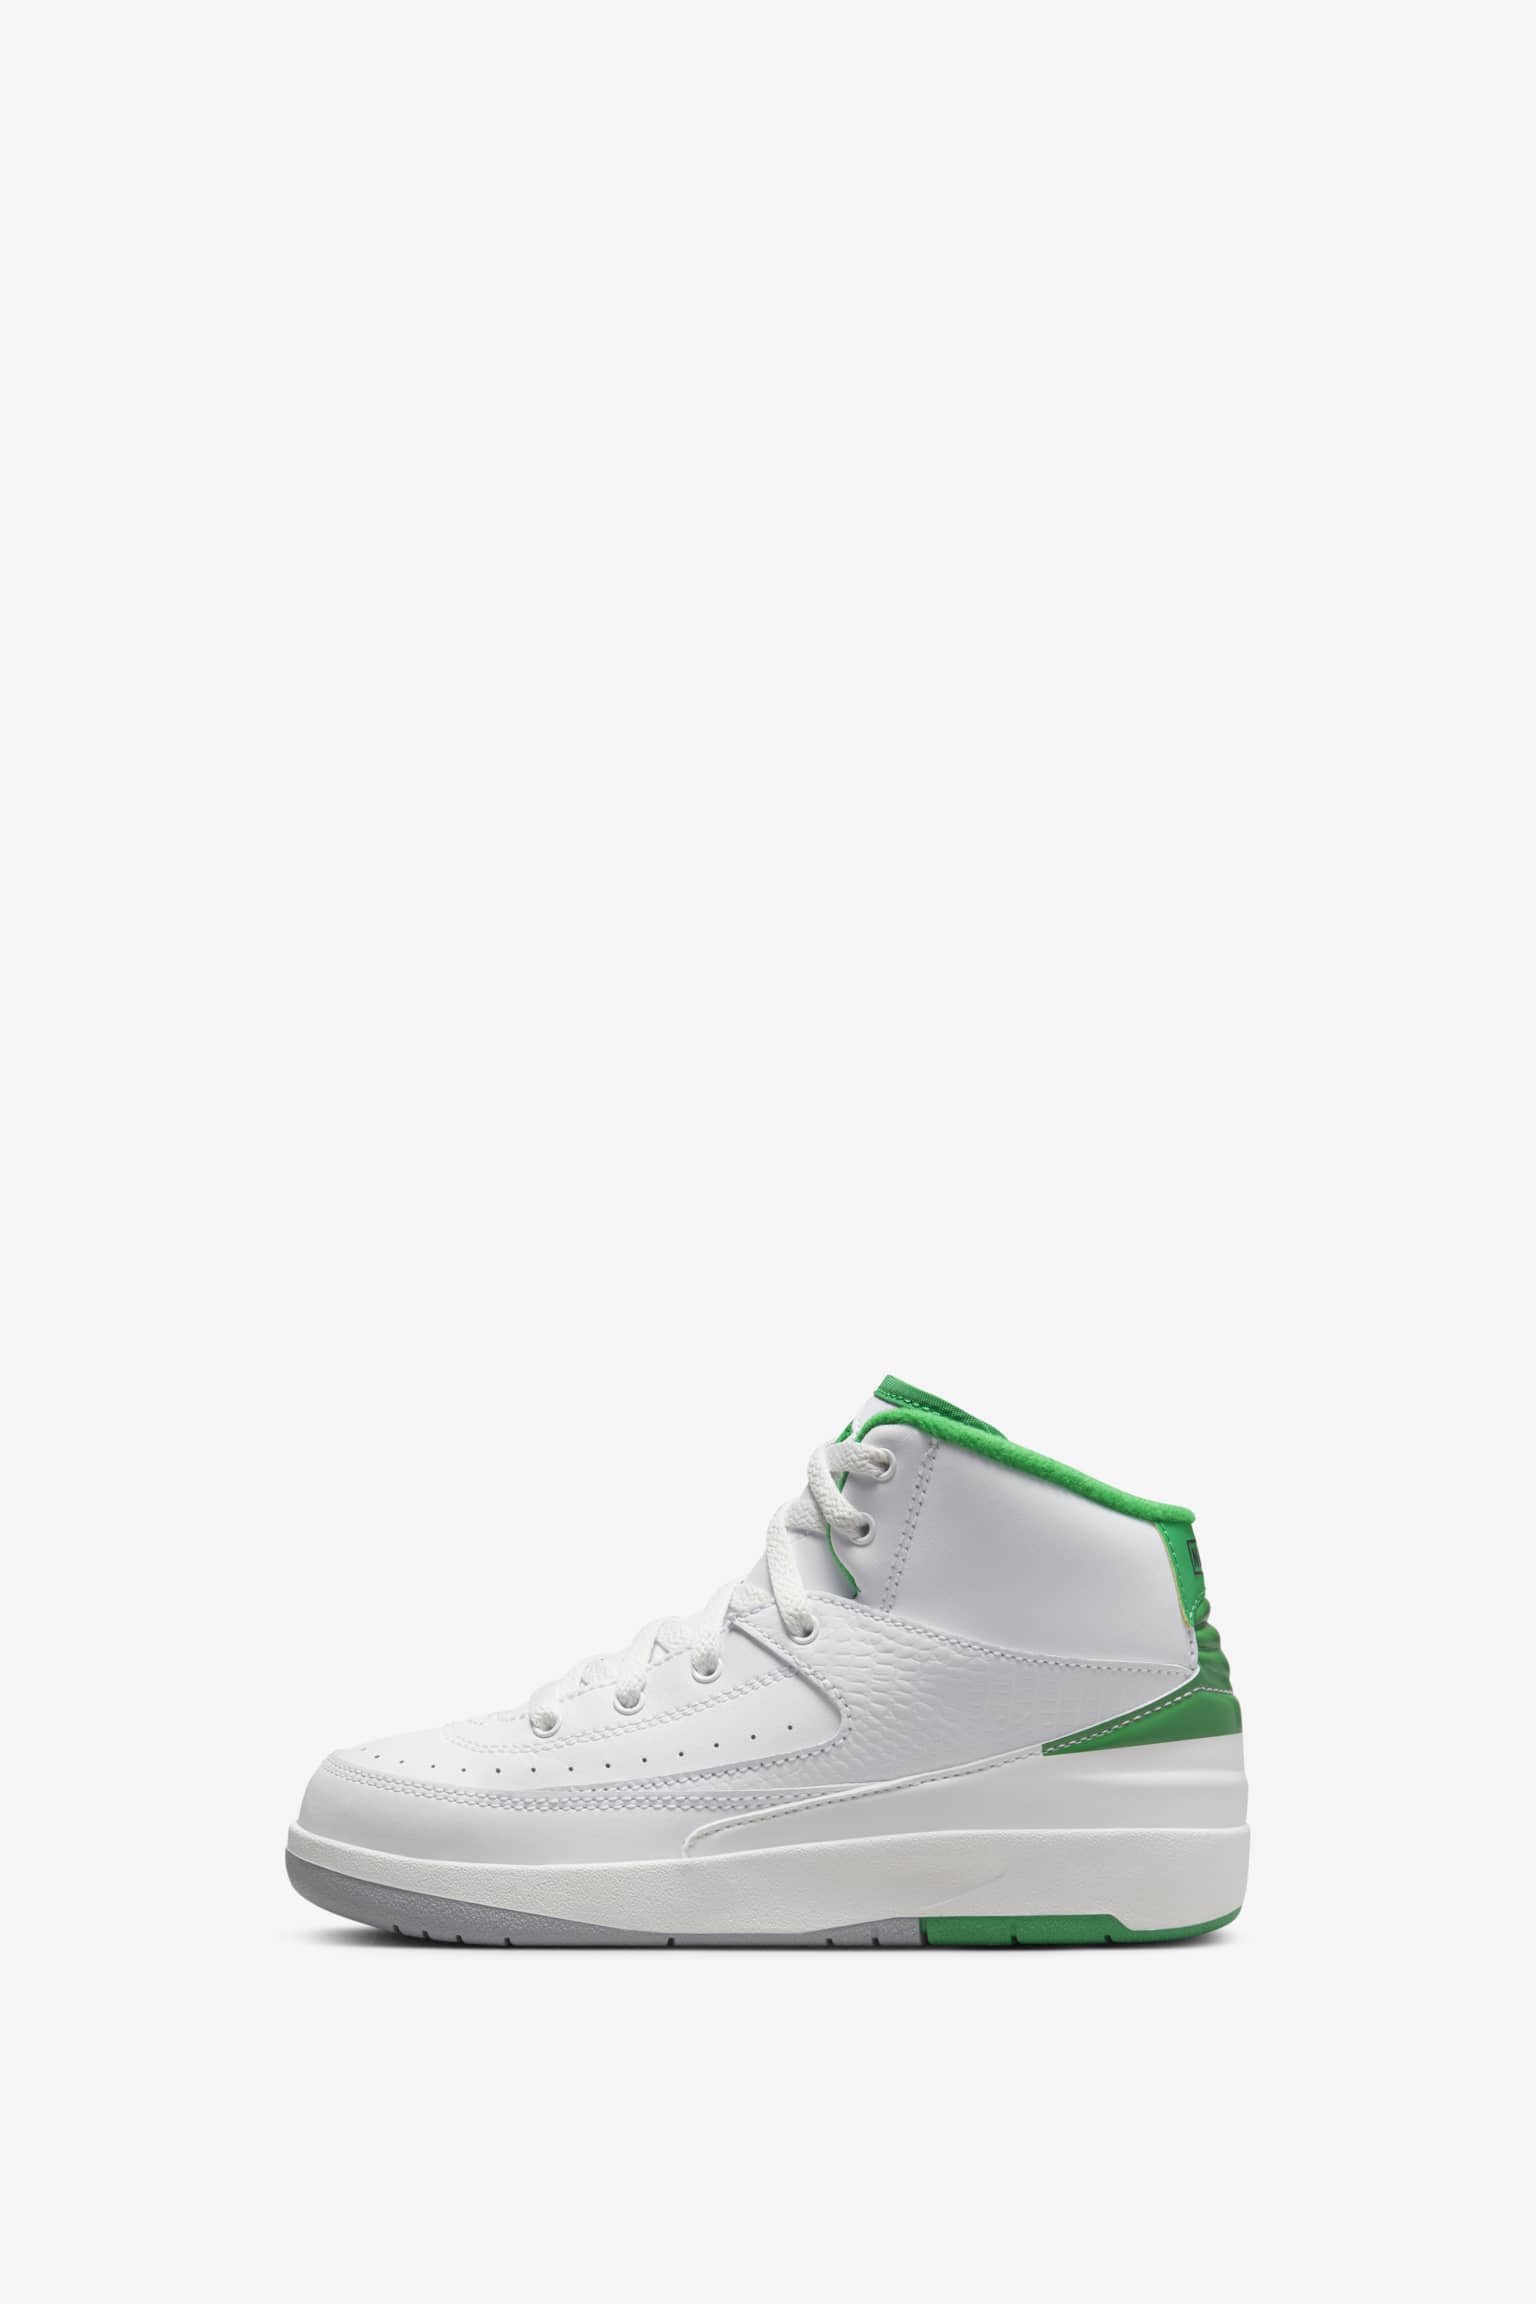 Air Jordan 2 'Lucky Green' (DR8884-103) Release Date. Nike SNKRS IN